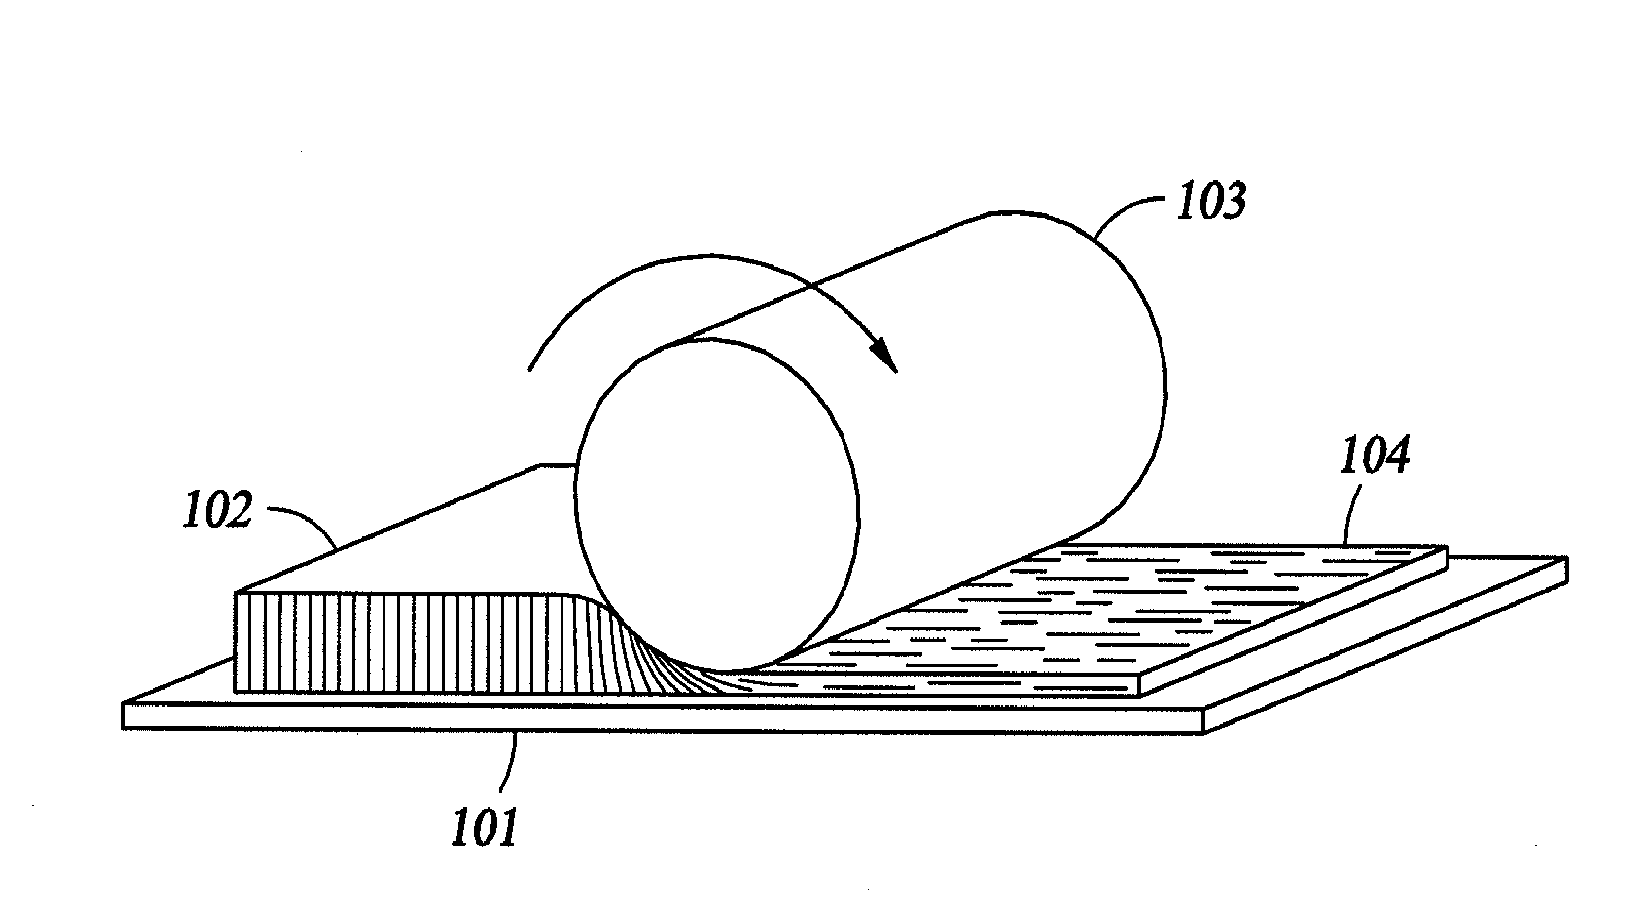 Method for Producing Aligned Near Full Density Pure Carbon Nanotube Sheets, Ribbons, and Films From Aligned Arrays of as Grown Carbon Nanotube Carpets/Forests and Direct Transfer to Metal and Polymer Surfaces